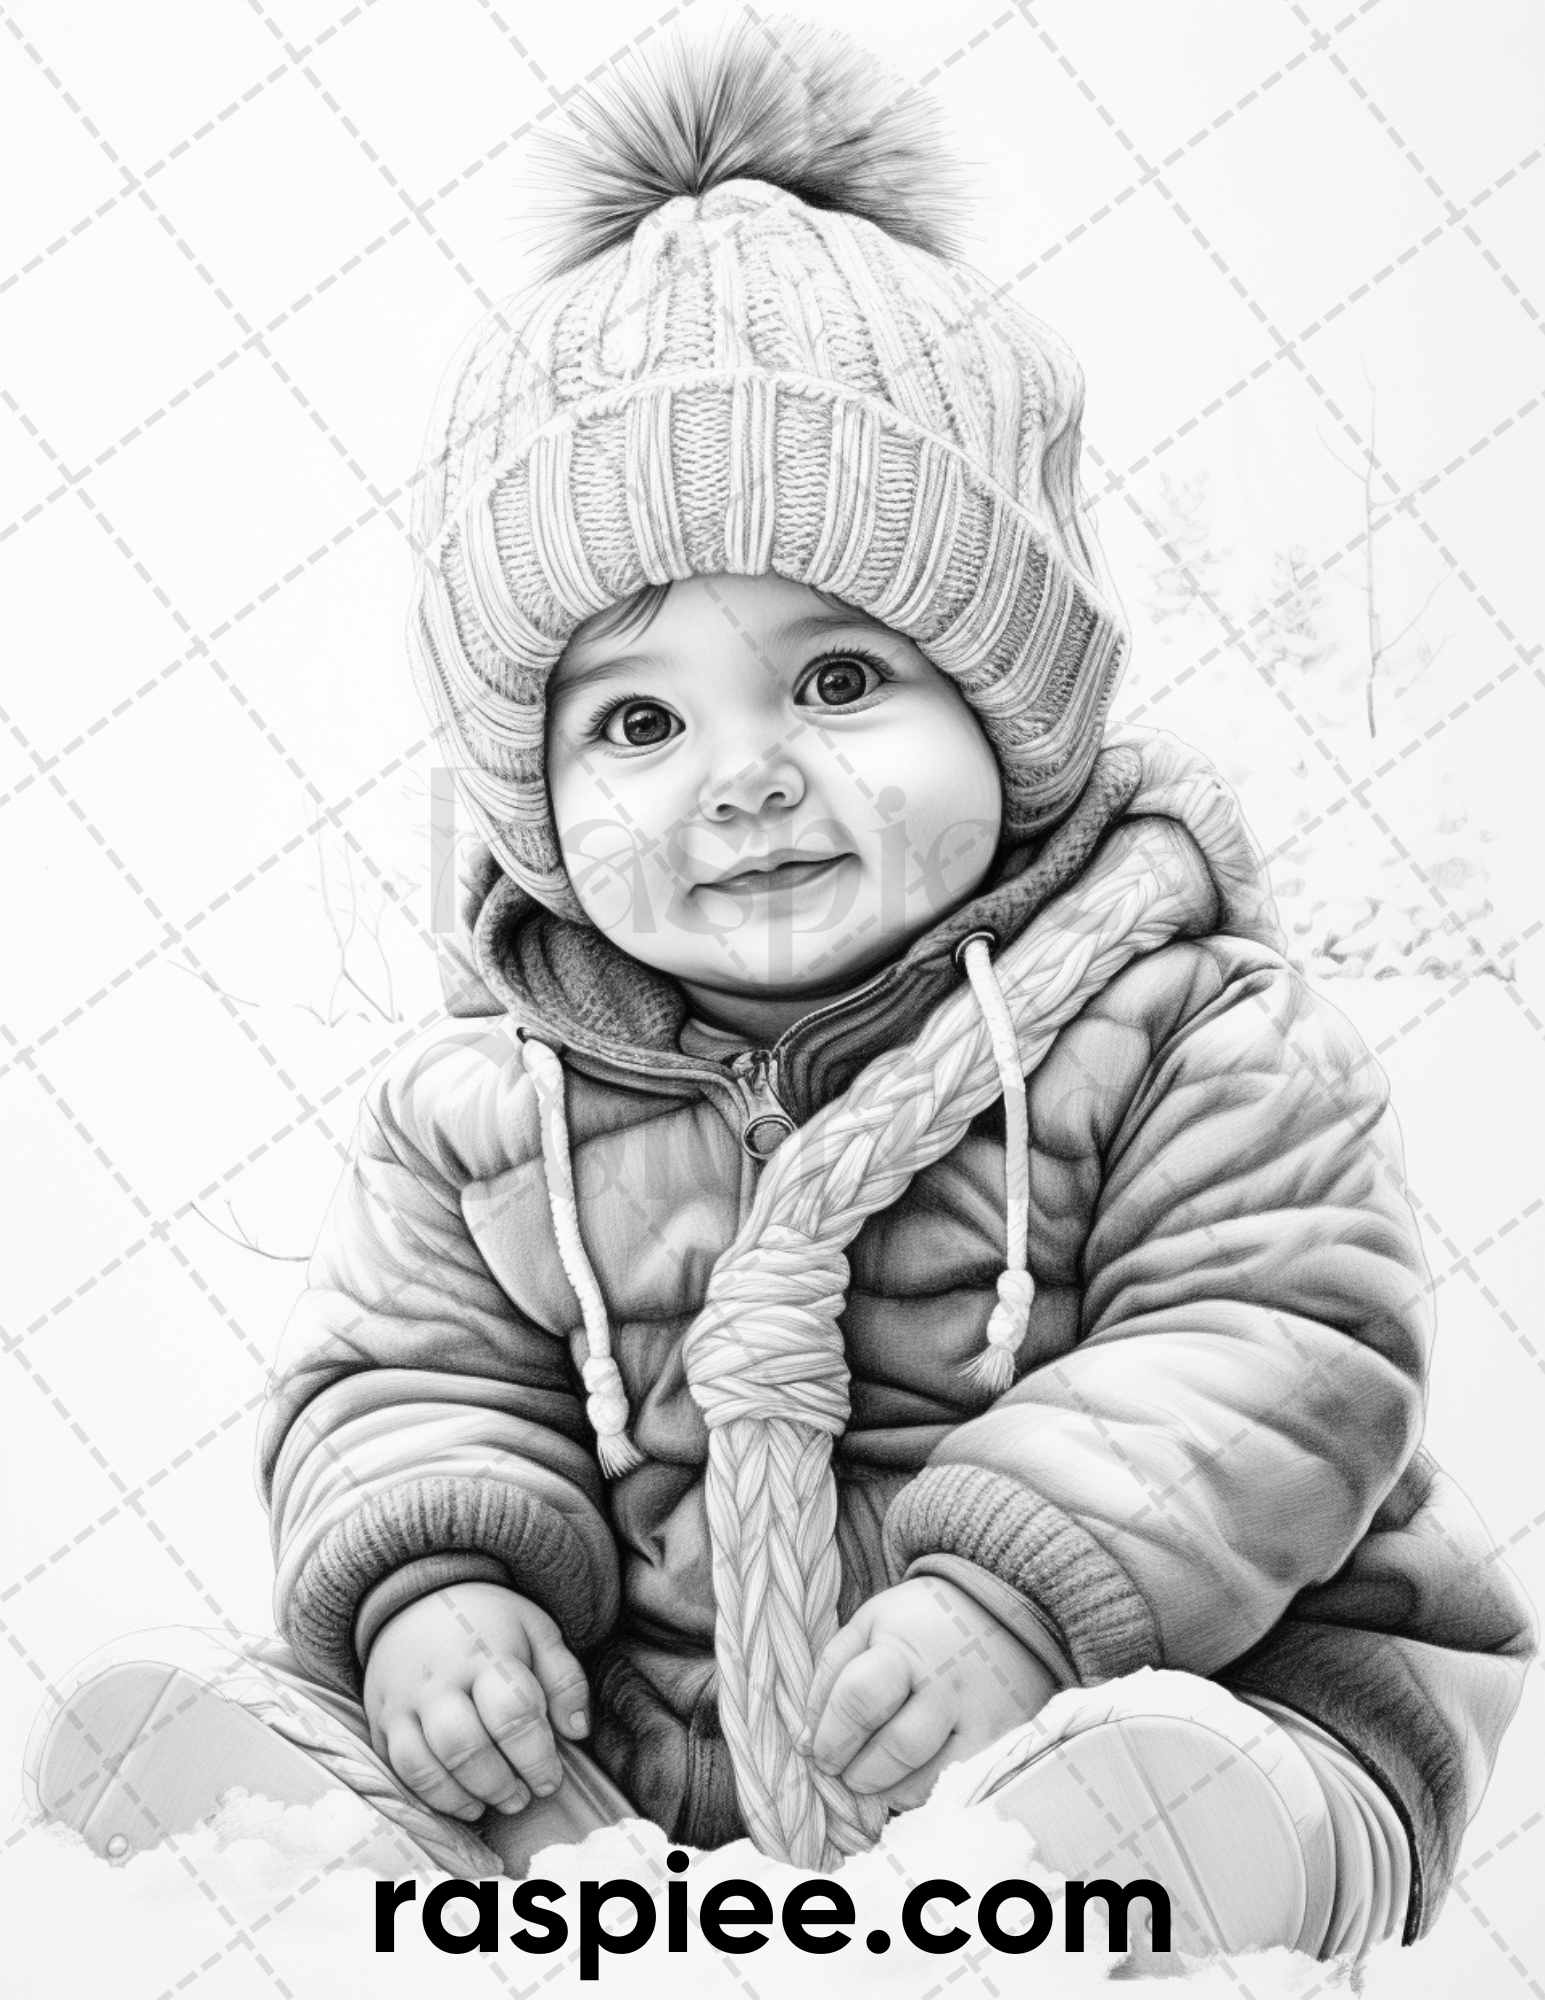 Baby Winter Portrait Coloring Page, Adult Coloring Activity, High-Quality Printable Page, Relaxing Coloring for Adults, Creative Coloring Project, Stress-Relief Coloring Page, Seasonal Coloring Fun, Winter Coloring Pages, Christmas Coloring Pages, Portrait Coloring Pages, Xmas Coloring Pages, Christmas Coloring Sheets